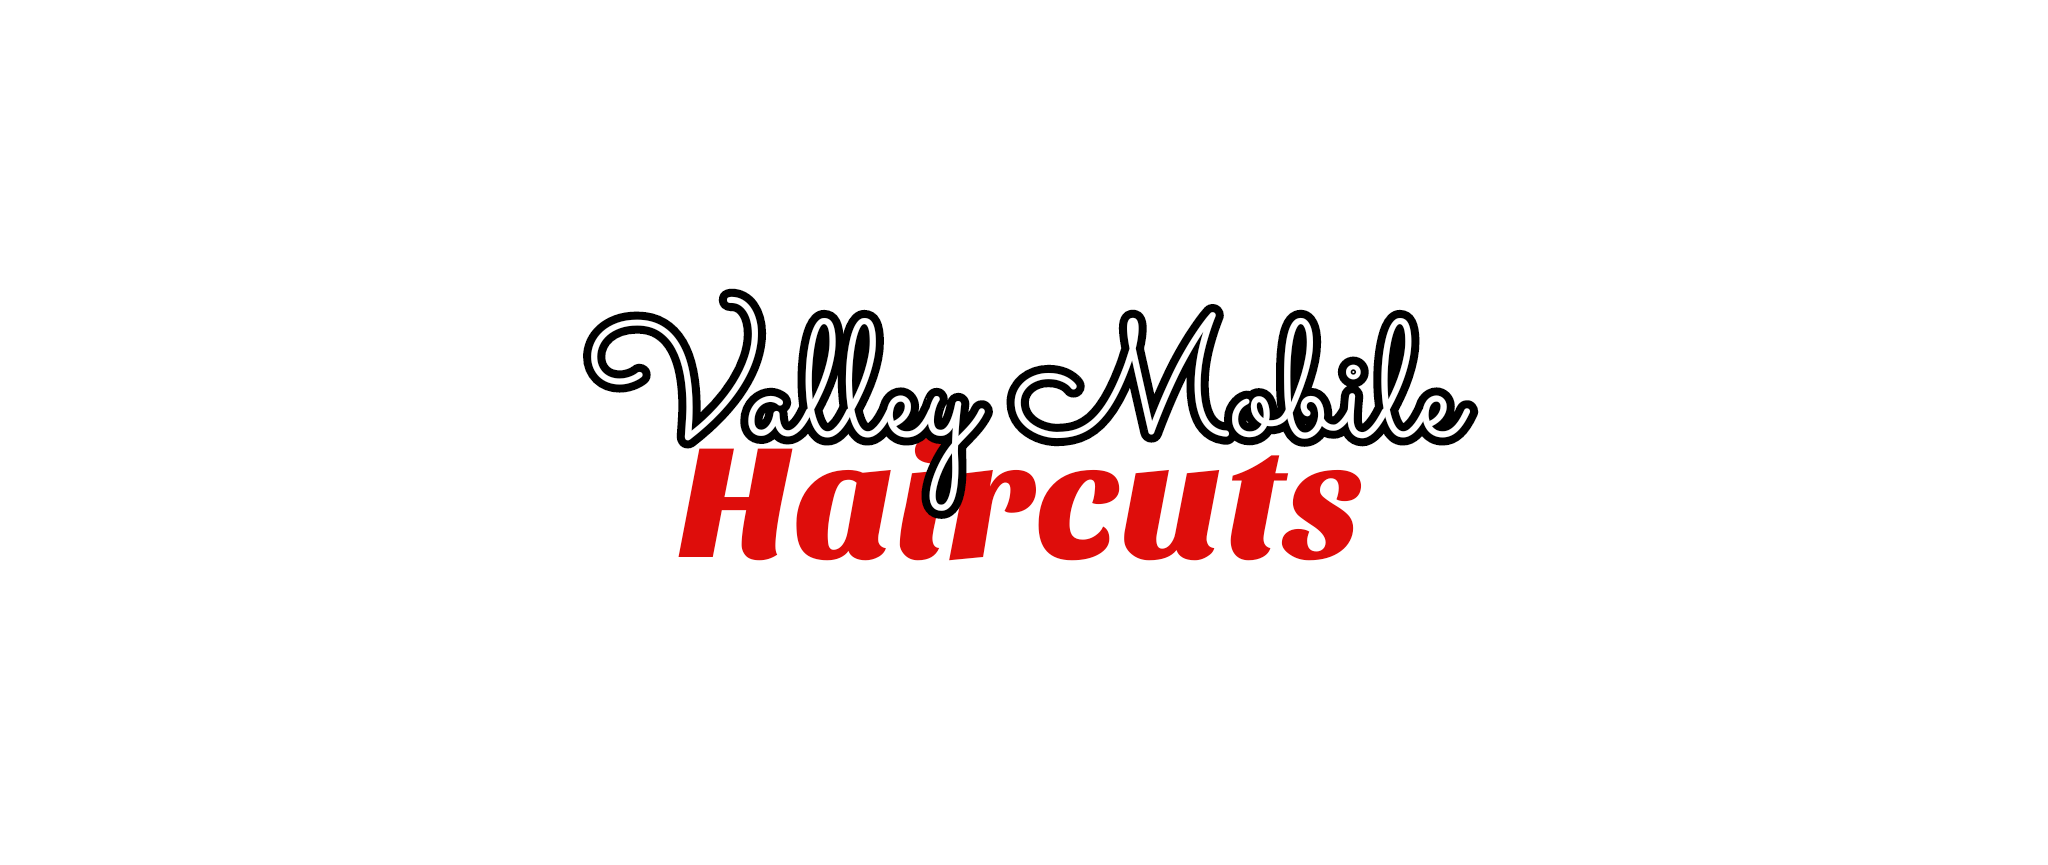 Valley Mobile Haircuts - What A Relief For My Loved One